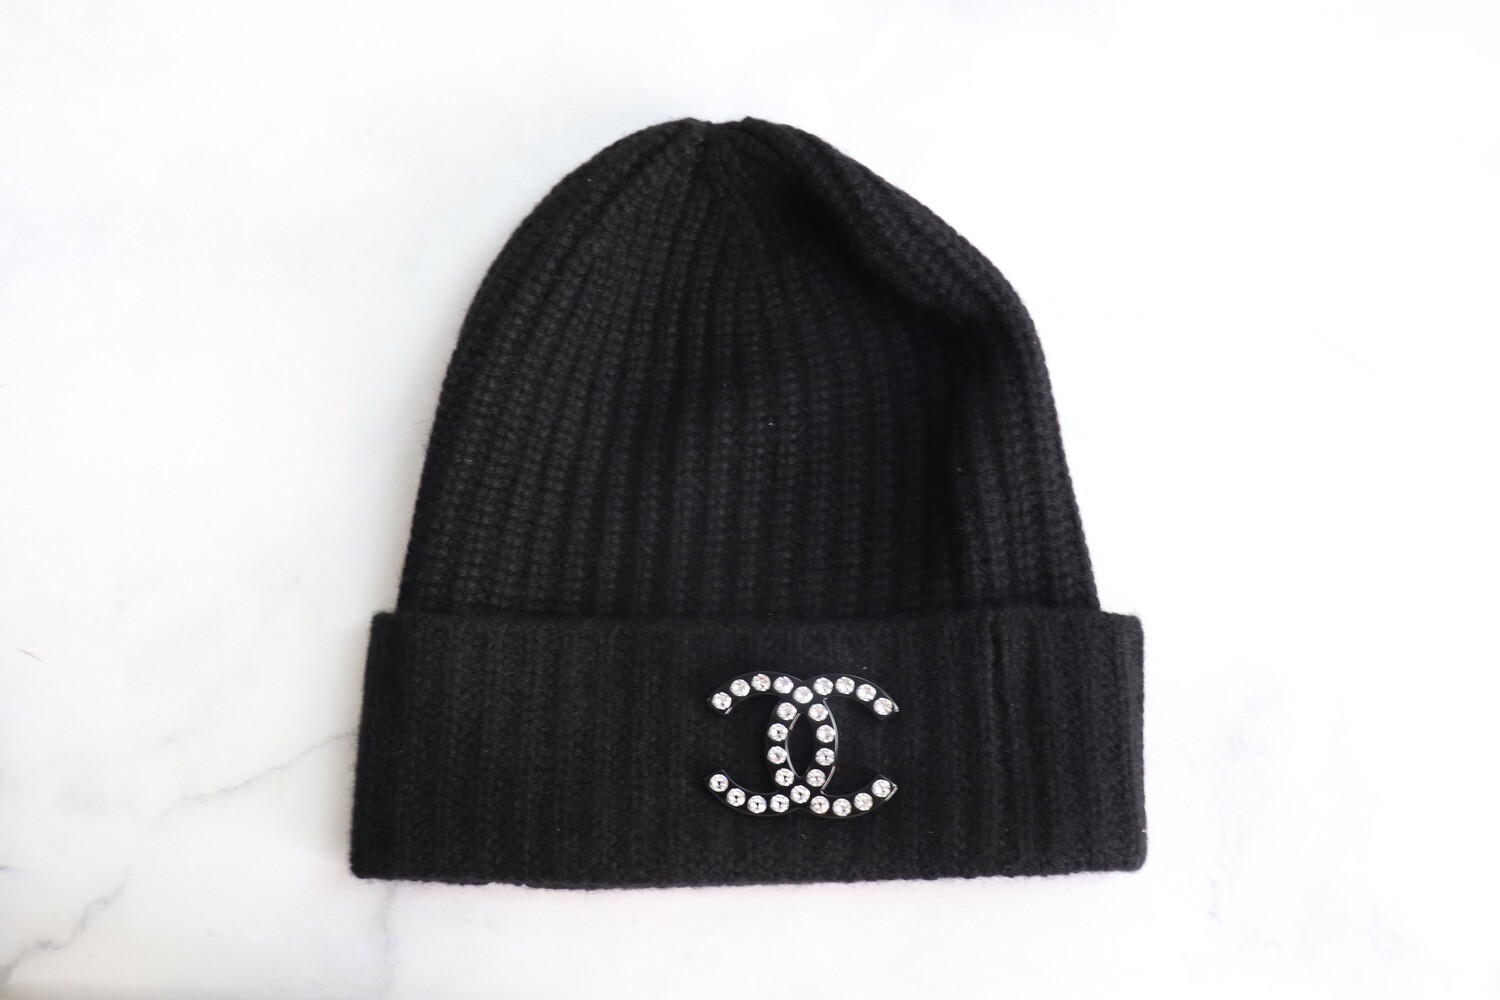 Chanel Hat Beanie Black with Crystal Brooch, New - No Box - Julia